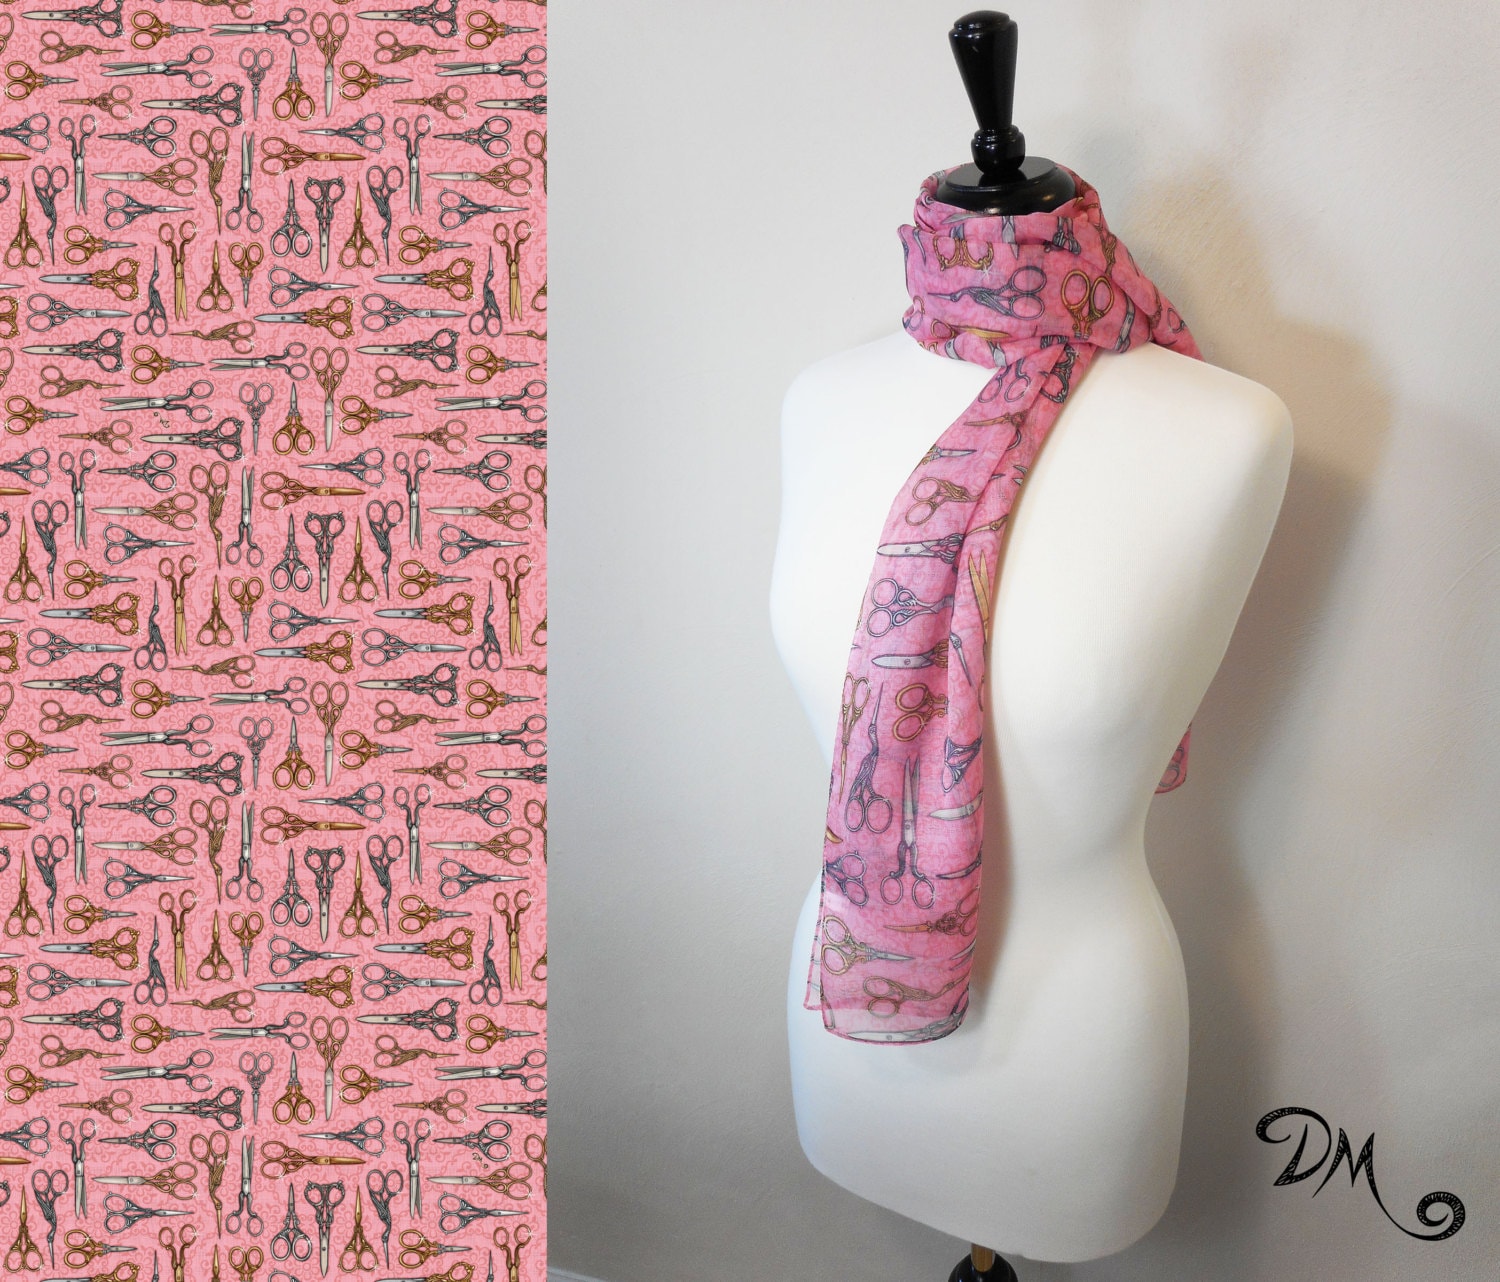 Vintage Sewing Quilting Themed Art Scarf by Dan Morris 